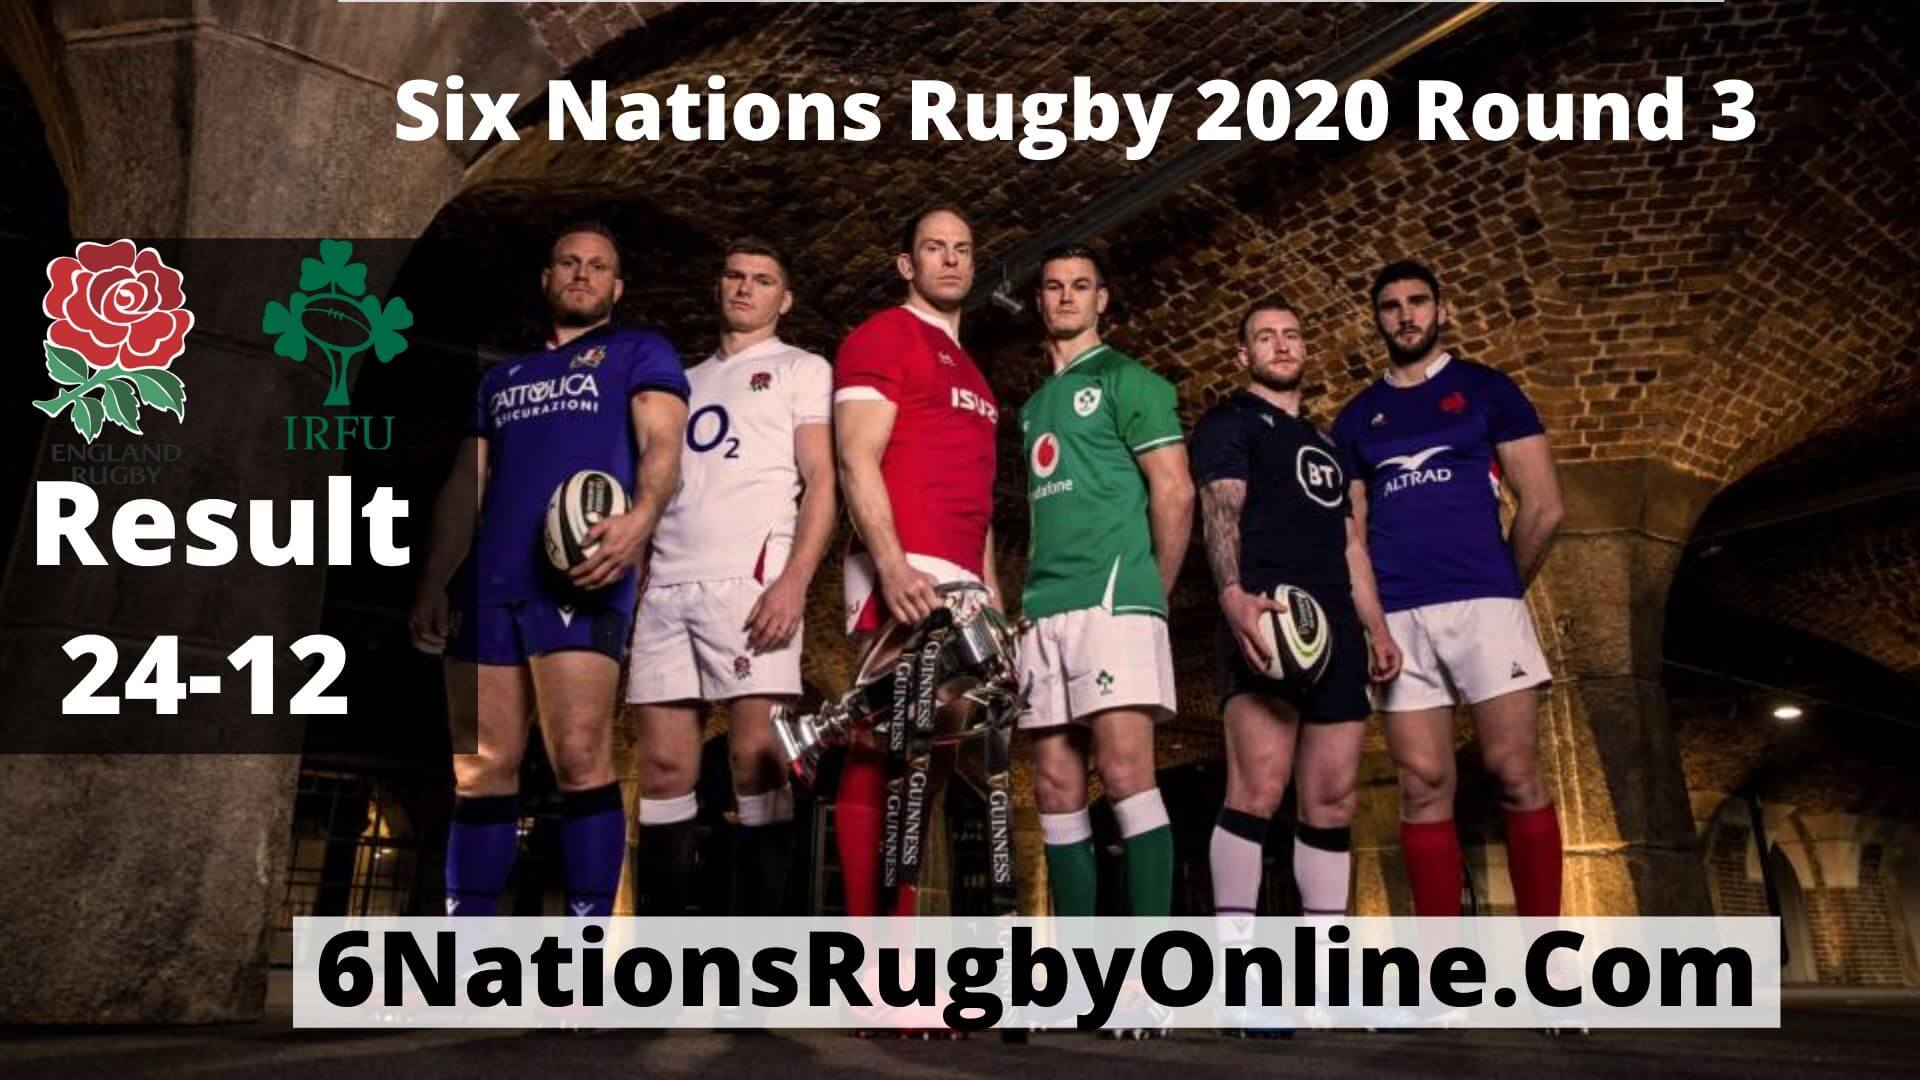 Ireland Vs England Result 2020 | Six Nations Rugby Rd 3